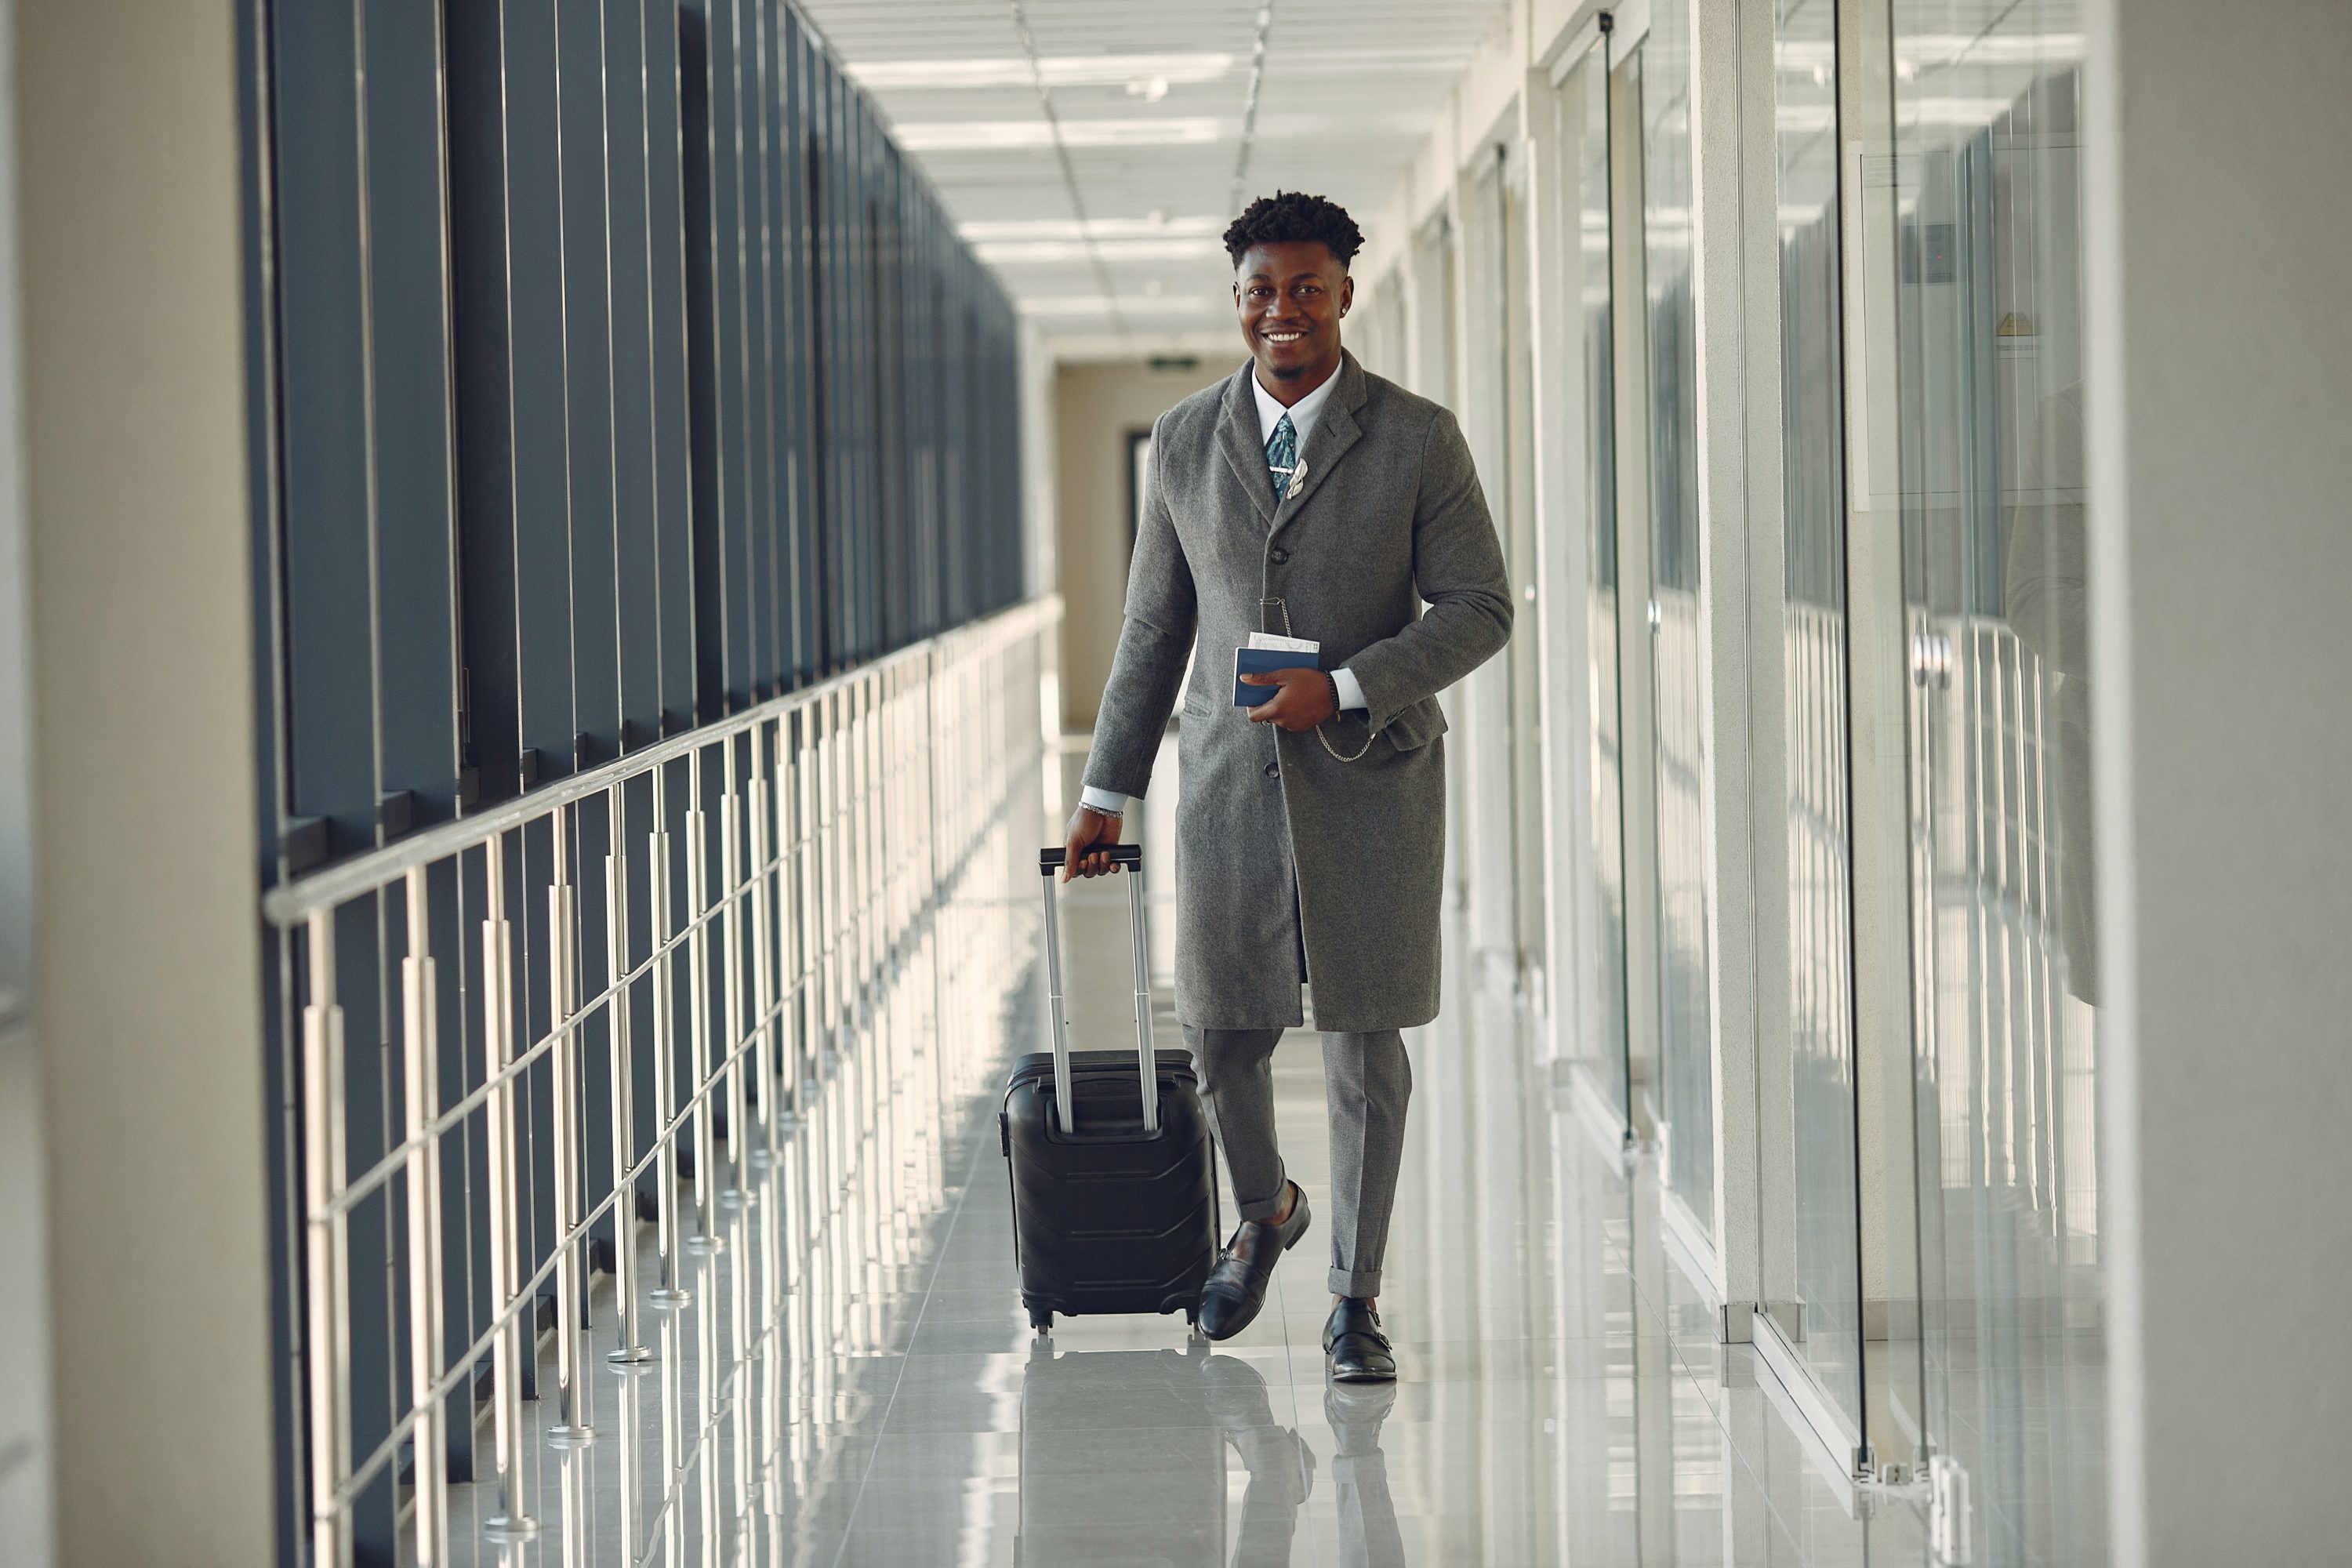 Businessman walking through airport with luggage